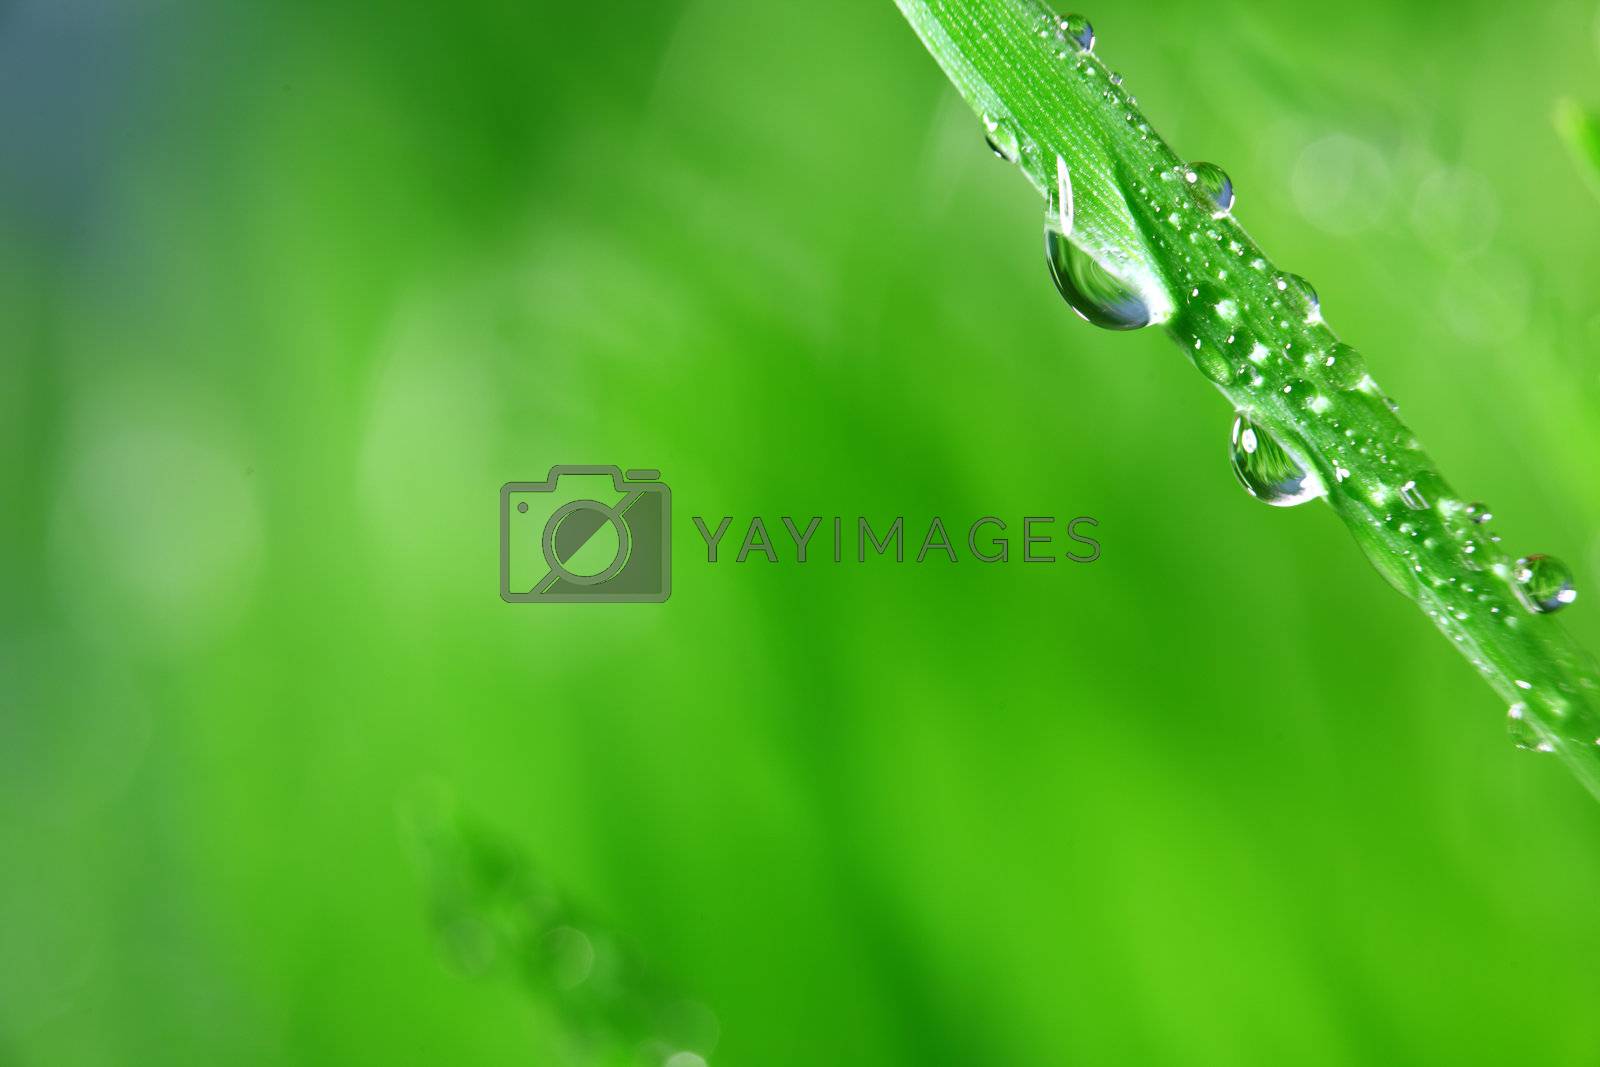 Royalty free image of big water drop by Yellowj